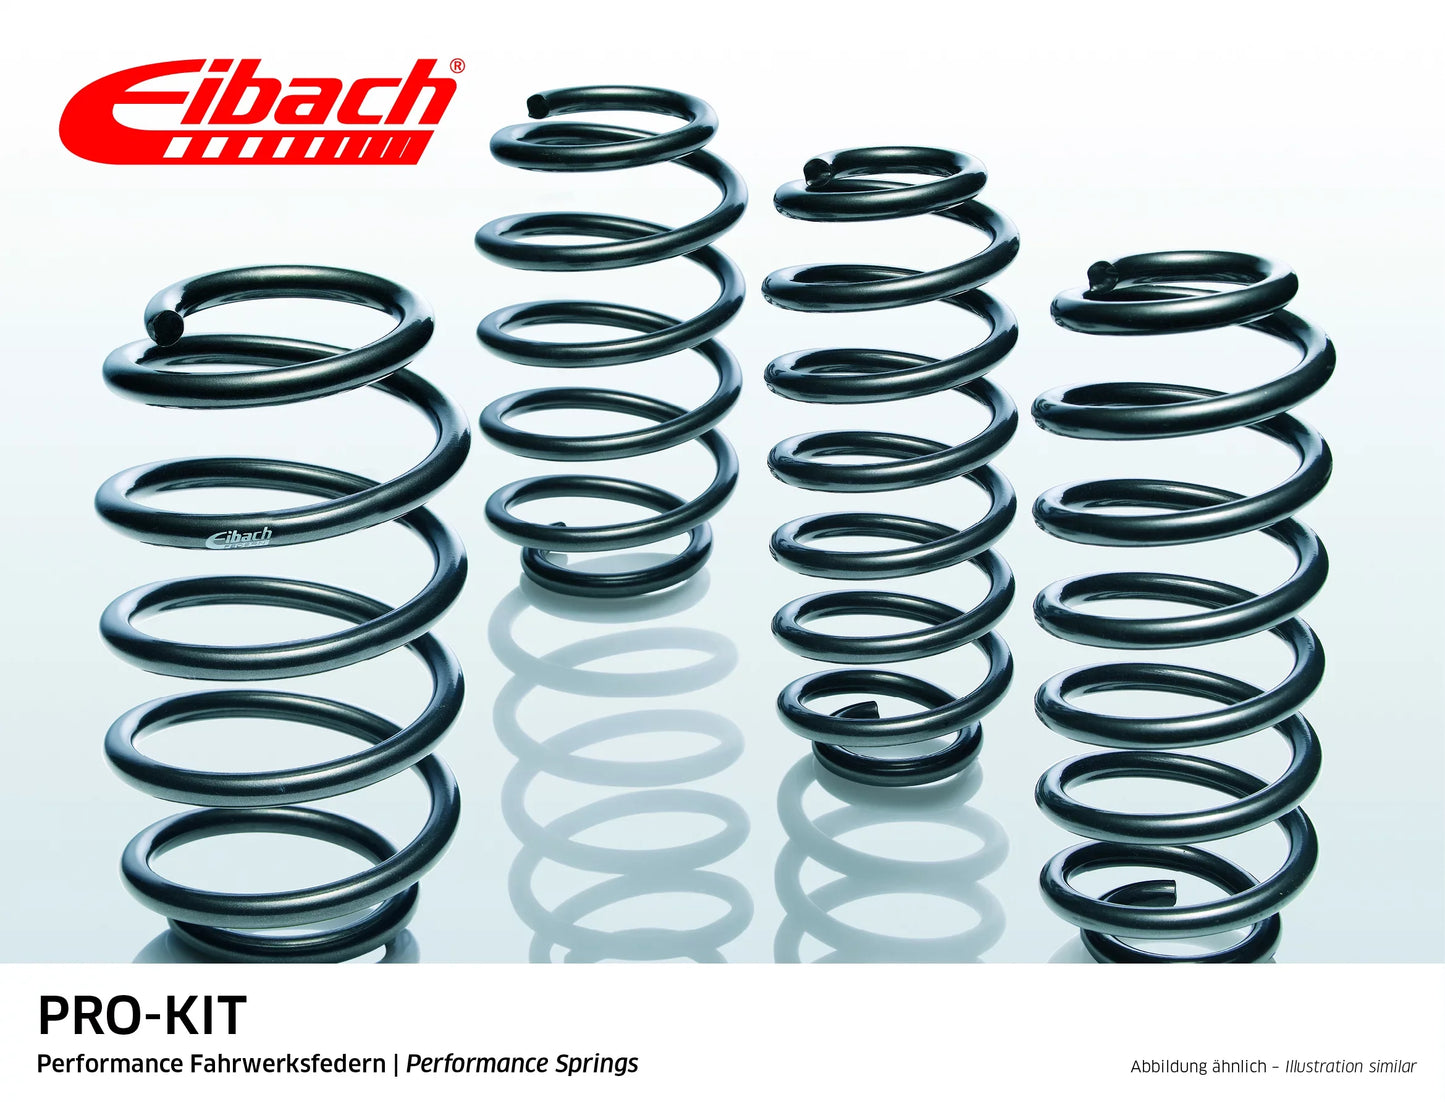 Eibach Pro-Kit Lowering Springs (E10-15-010-07-22) at £300.36